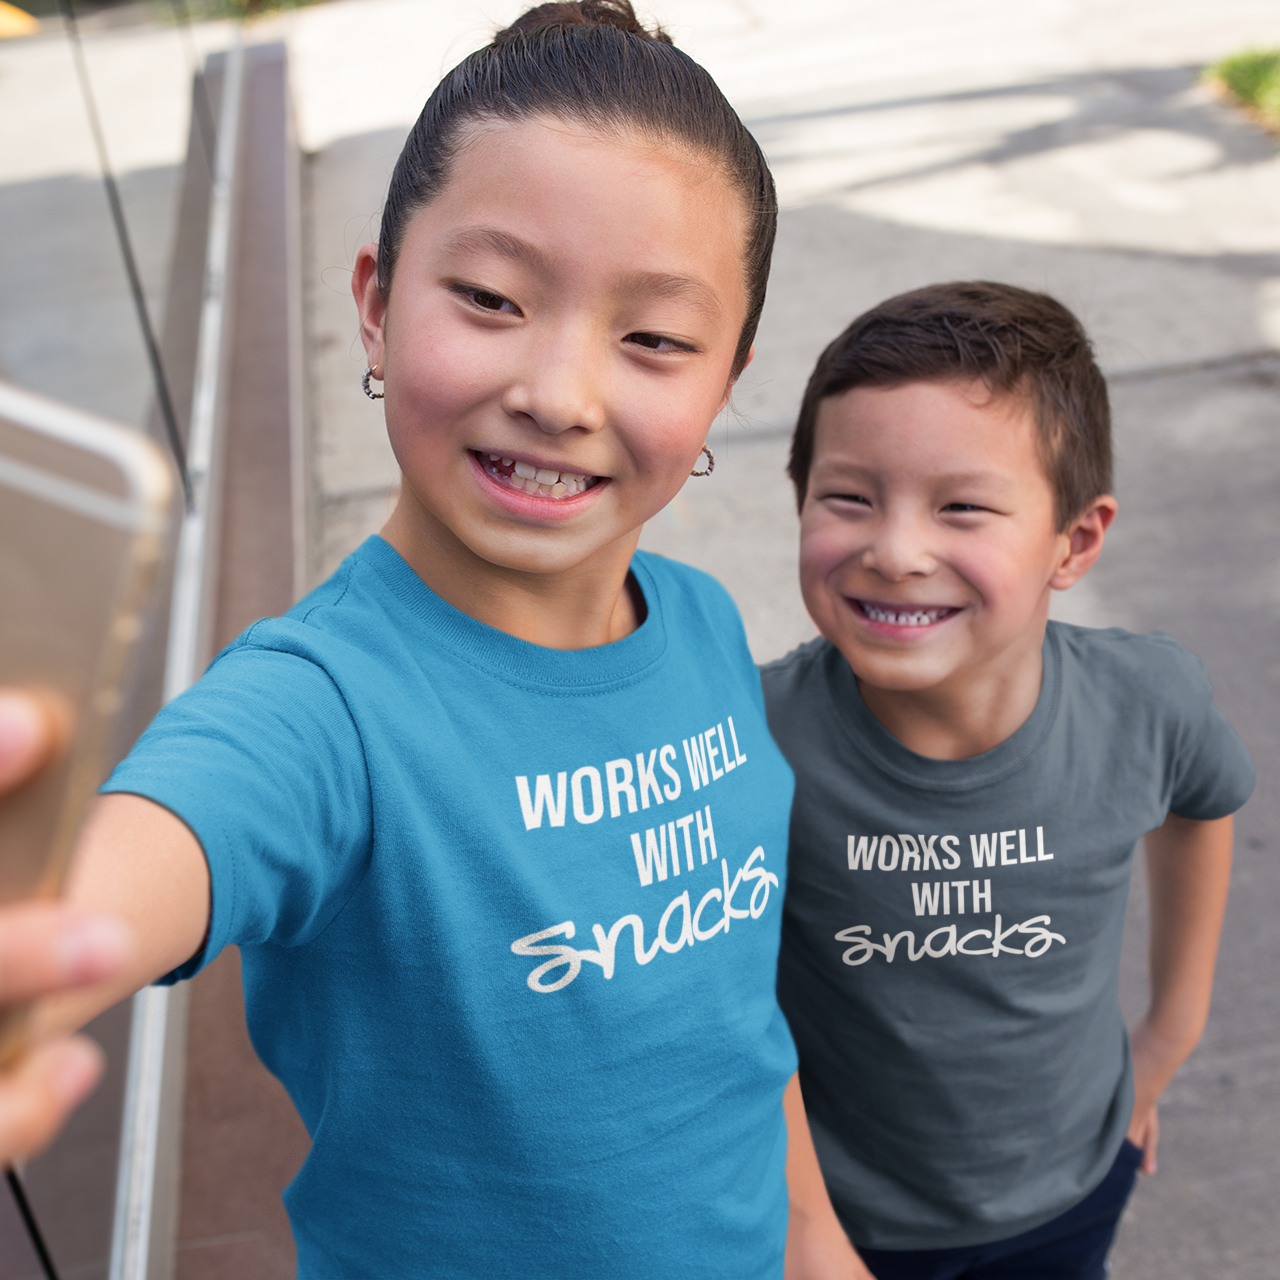 'Works well with snacks' kids shortsleeve shirt